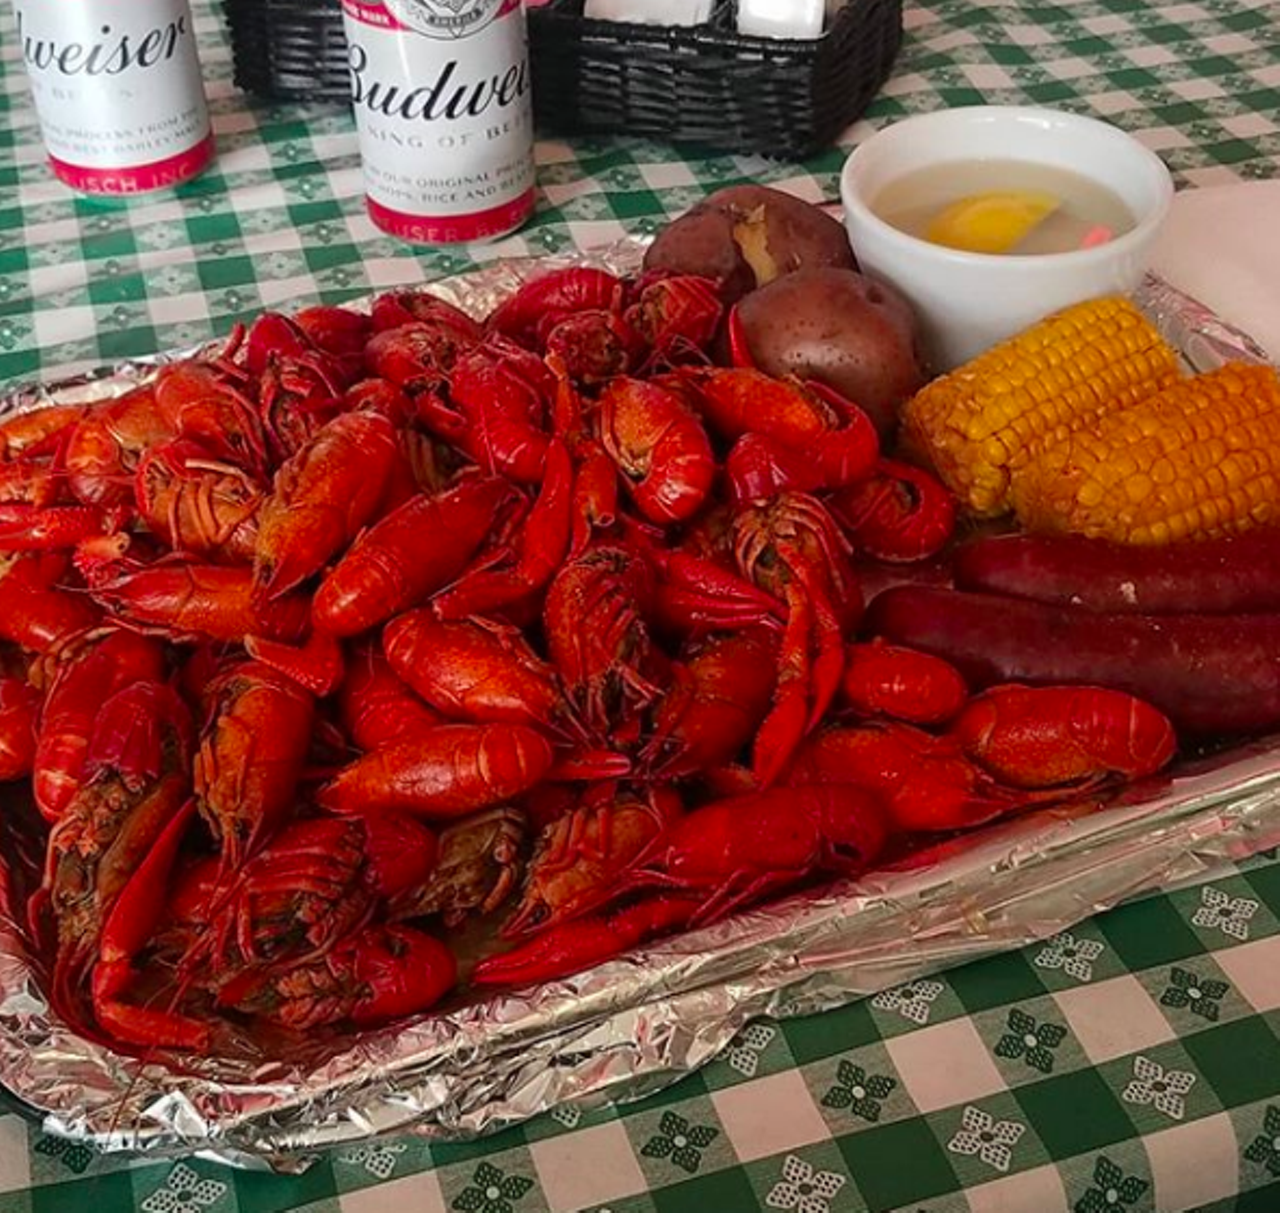 Ma Harper’s Creole Kitchen
1816 N New Braunfels Ave, (210) 226-2200
An East Side classic, Ma Harper’s is a must-visit for traditional Southern fare – and yes, that includes crawfish! During crawfish season, take advantage of this treat being on the menu. Just ask Ma Harper for the goods and she’ll take care of you.
Photo via Instagram / nofunfrank